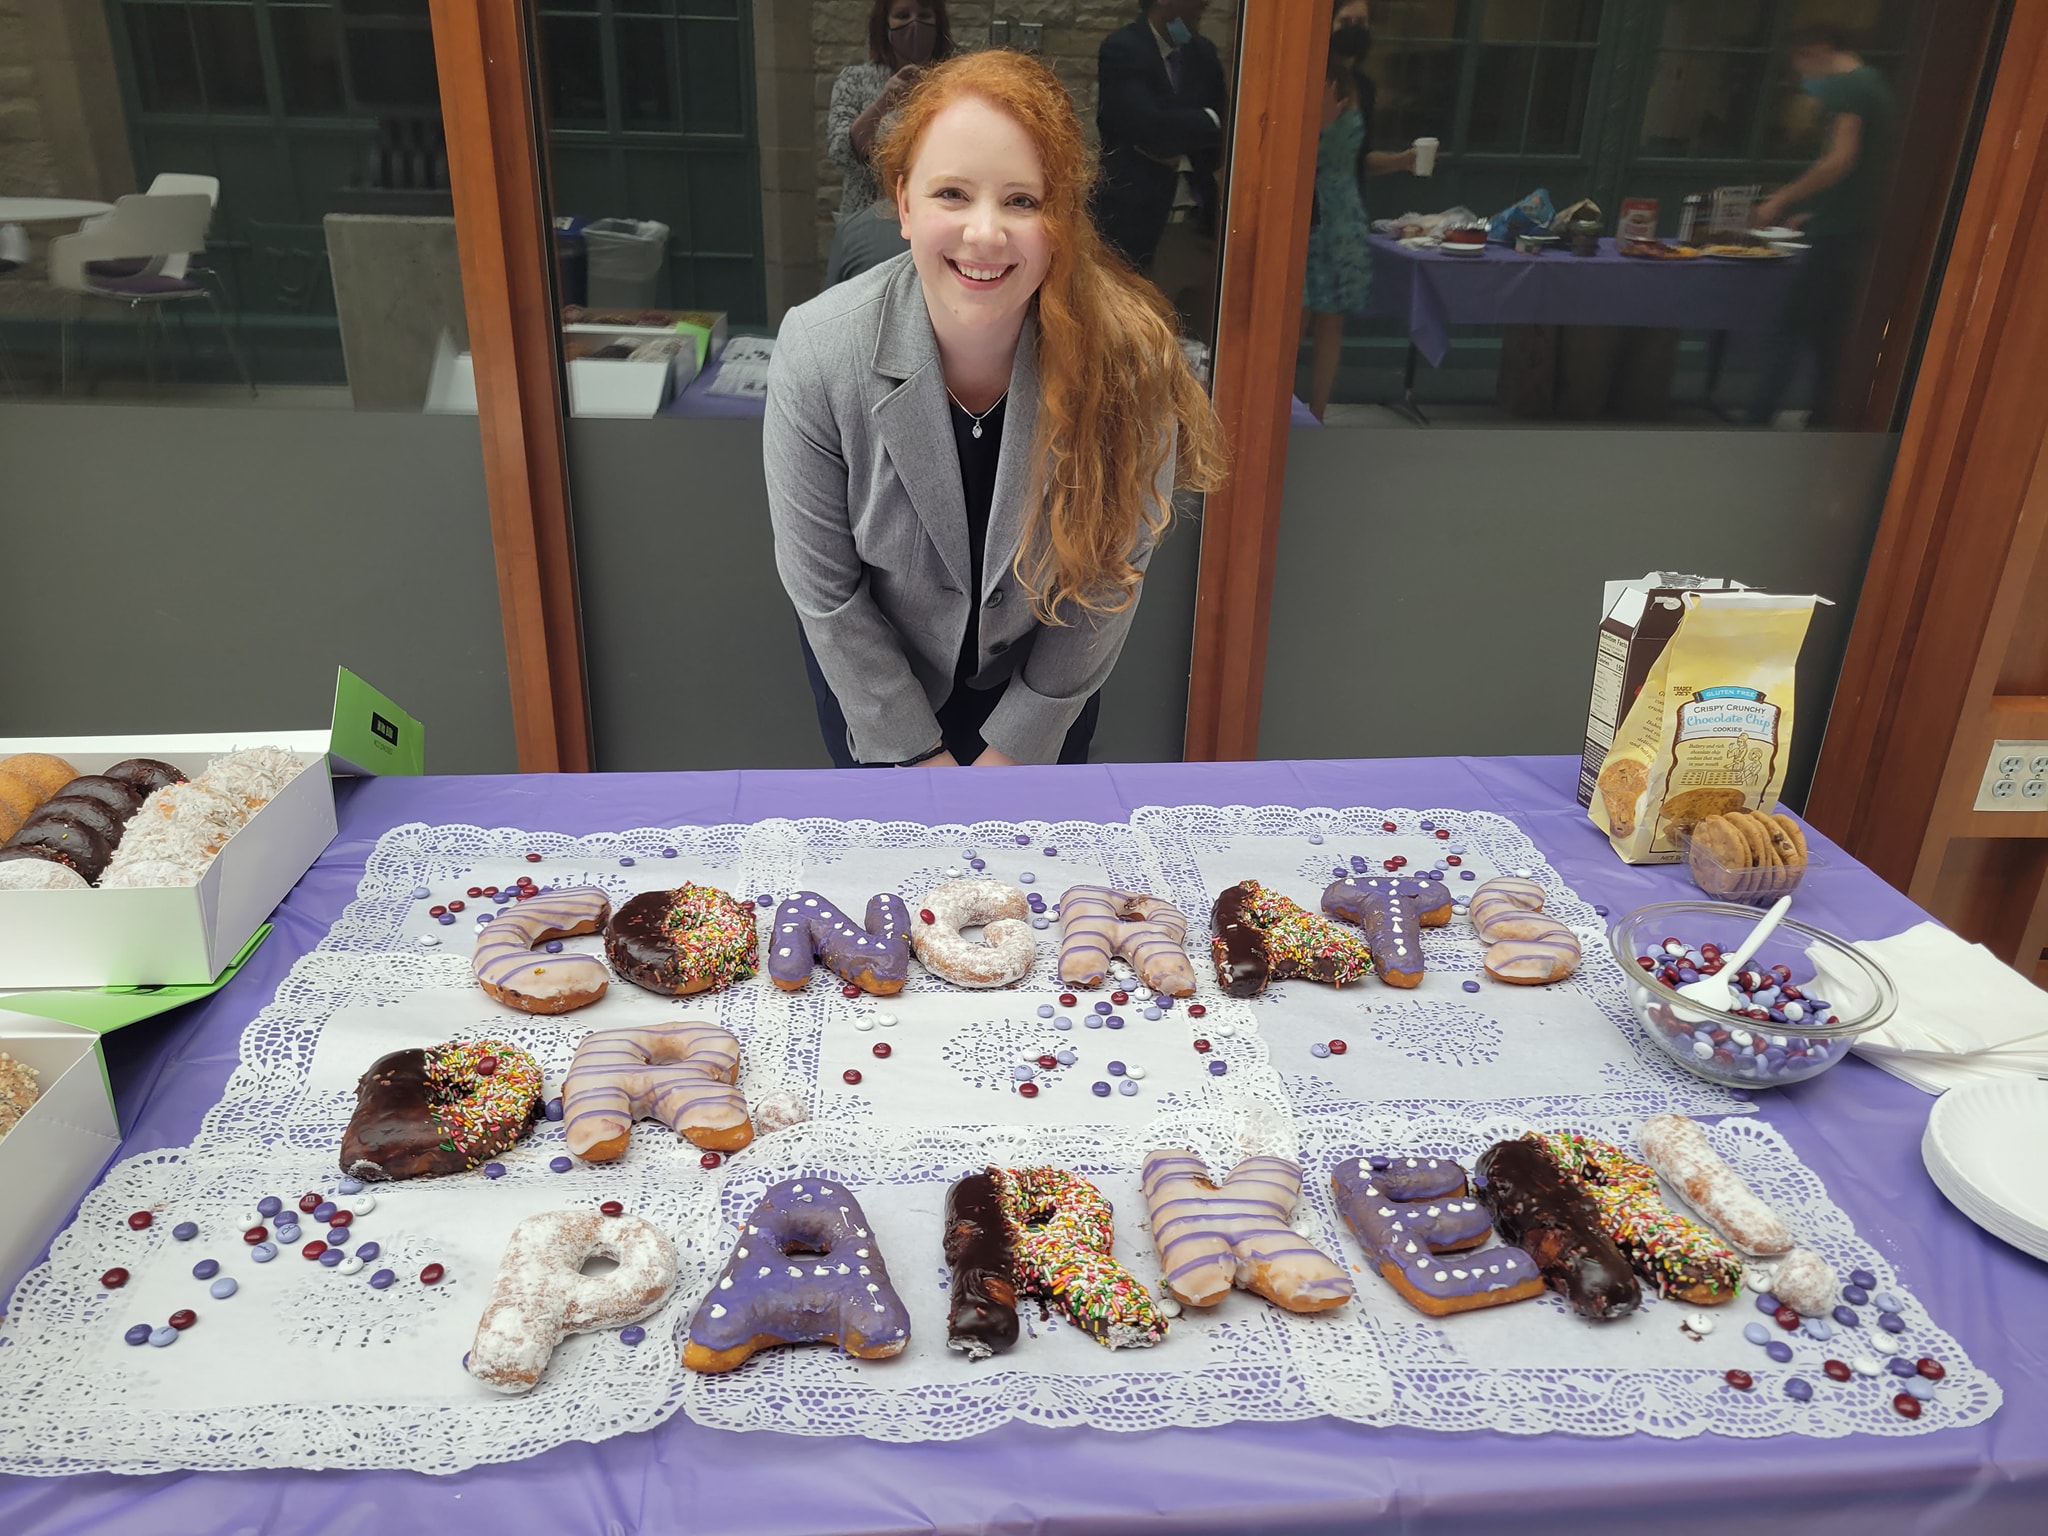 Dr. Kelly Parker stands in front of celebratory donuts after successfully defending.